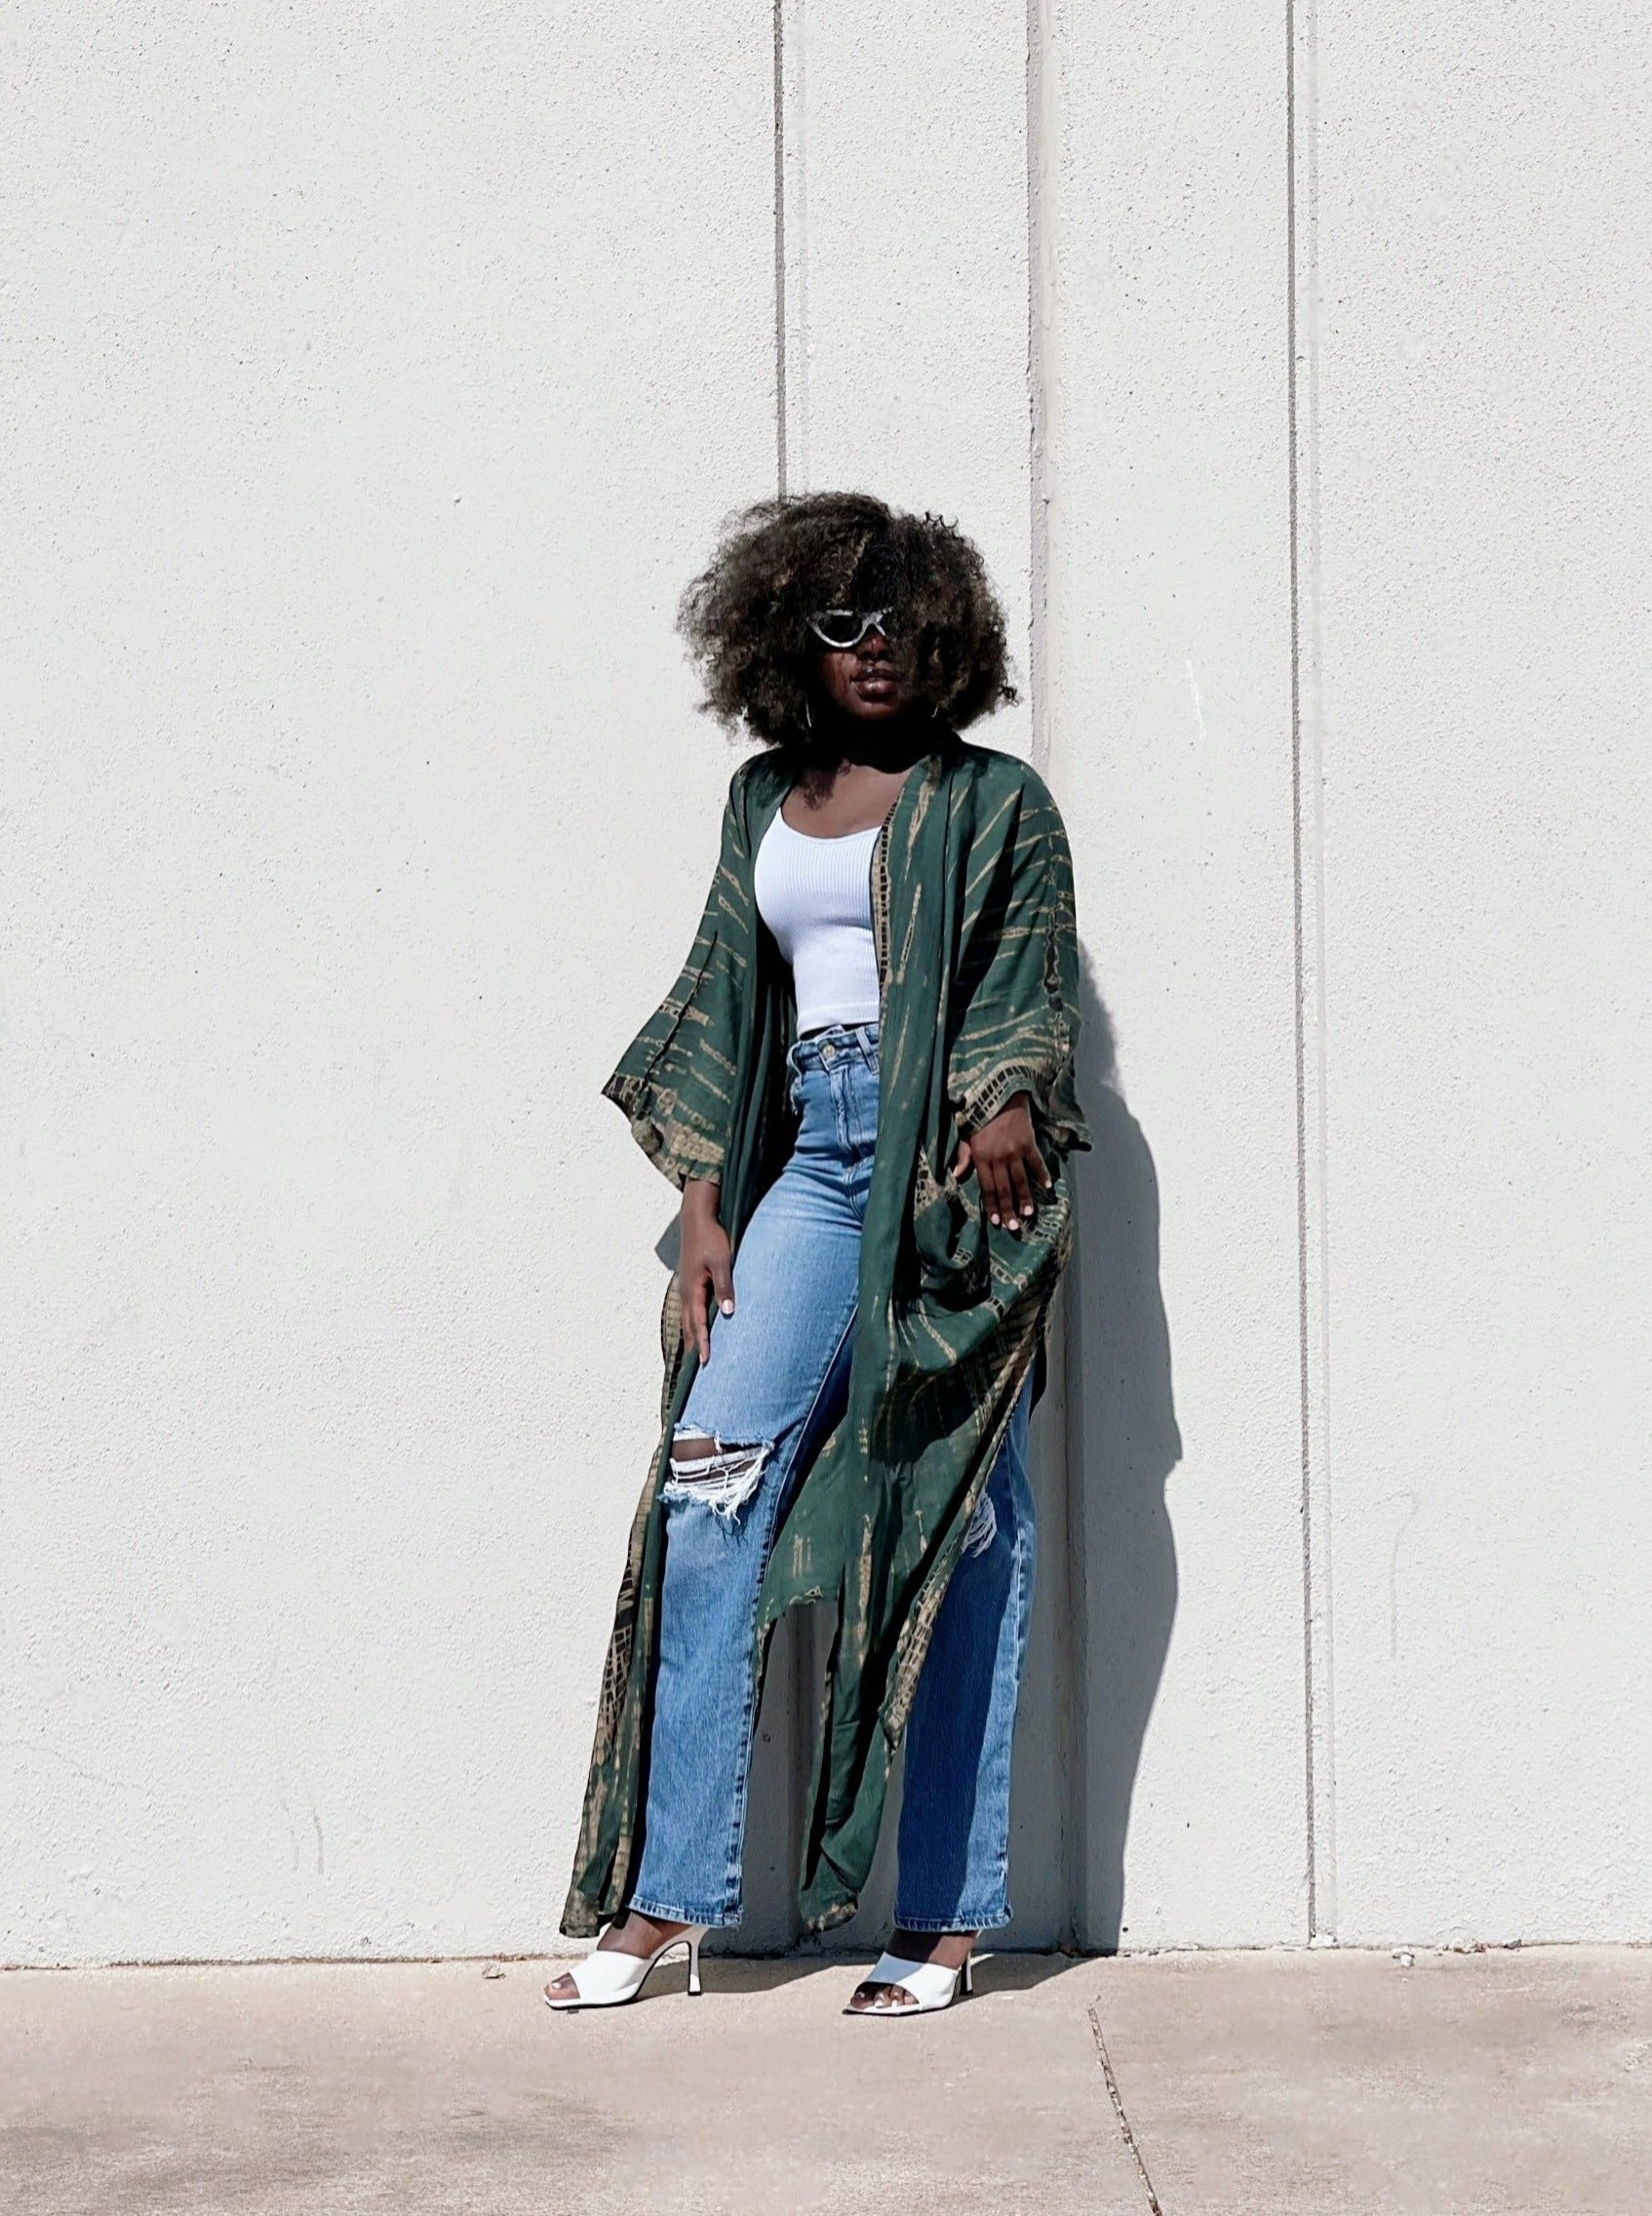 Shop Long kimono robe, tie dye kimono robe with boho style with unique handcrafted by artisans from Coco de Chom?